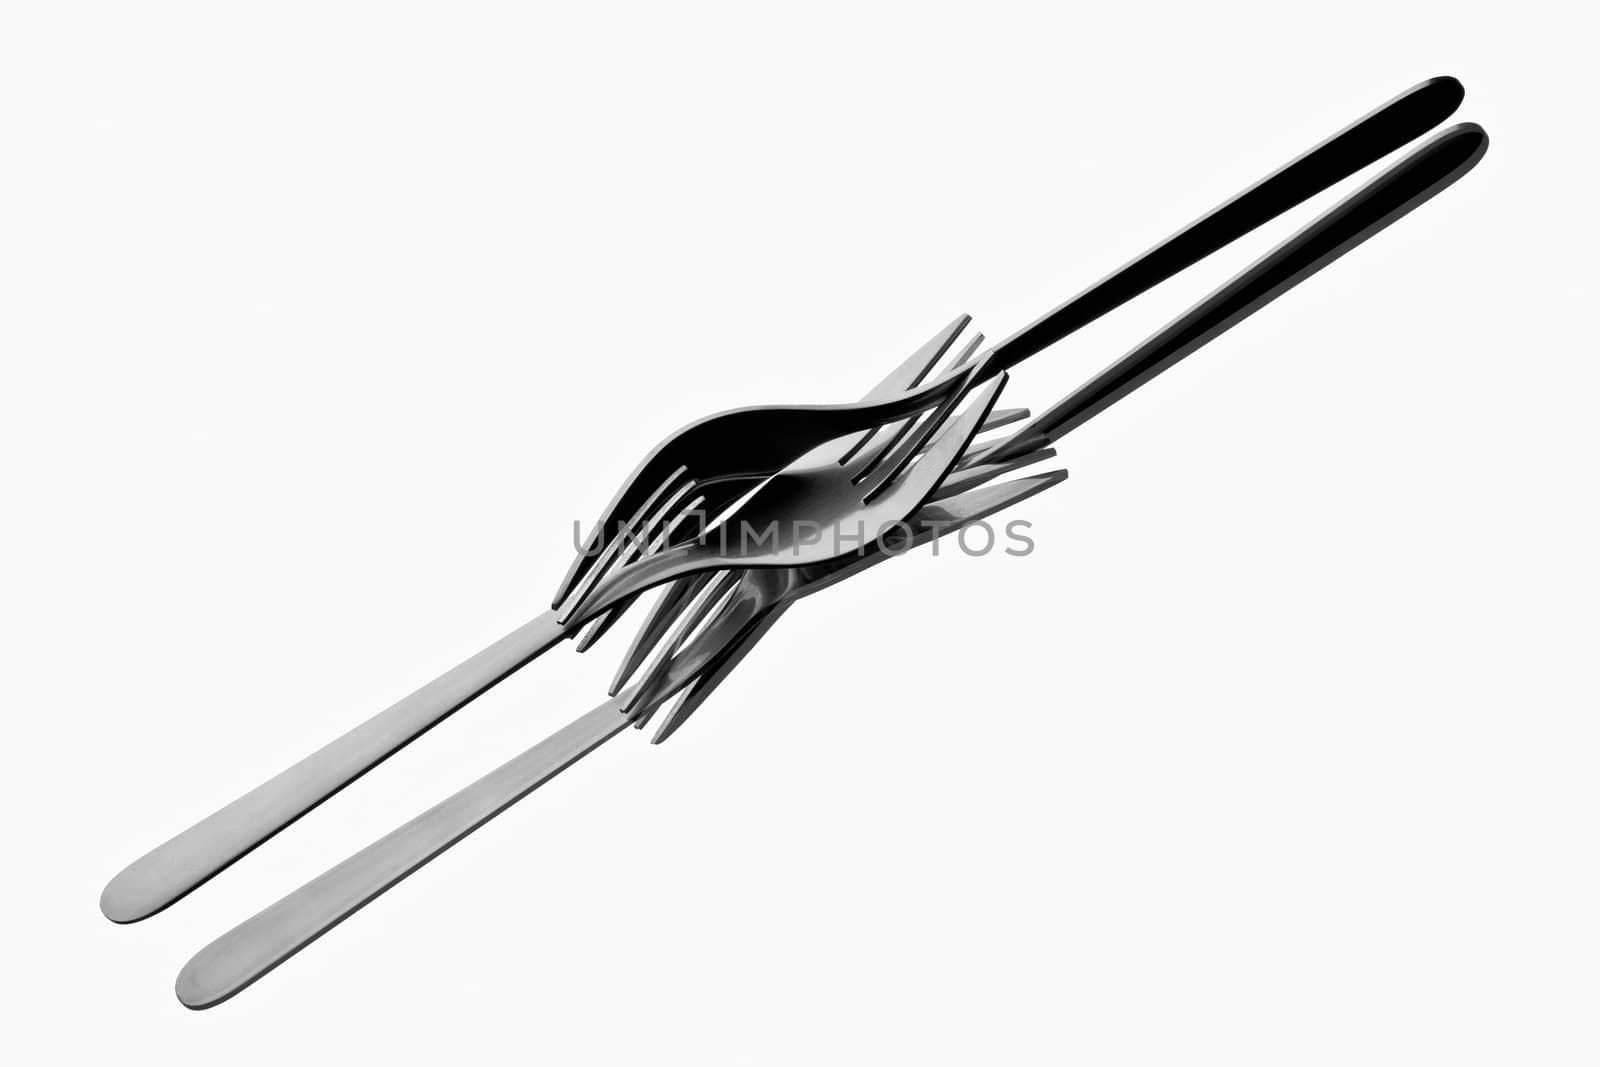 Two forks tangled up on reflecting white background